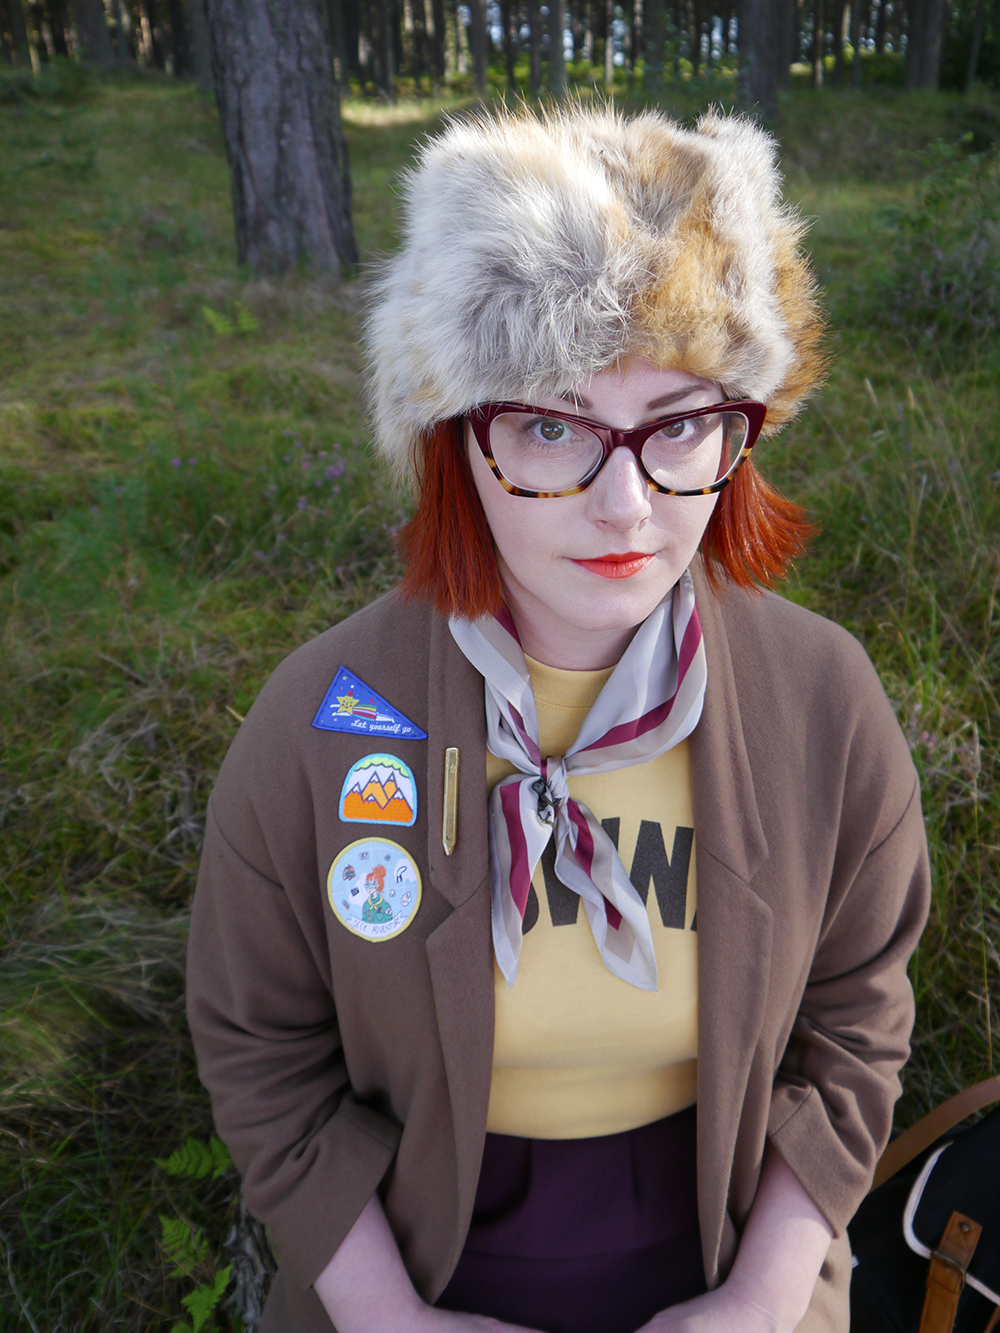 Scottish blogger, style blogger, Moonrise Kingdom outfit, Moonrise Kingdom style, costume idea, Wes Anderson inspired outfit, Sam Moonrise Kingdom, scout style, Moonrise kingdom inspired outfit, vintage style, fur hat, Spex Pistols glasses, patches for adventurers, Lucky Dip Club patches, Olivia Mew cat scarf, vintage Brownies tshirt, Rag Trade Vintage, primark backpack, adventurer style